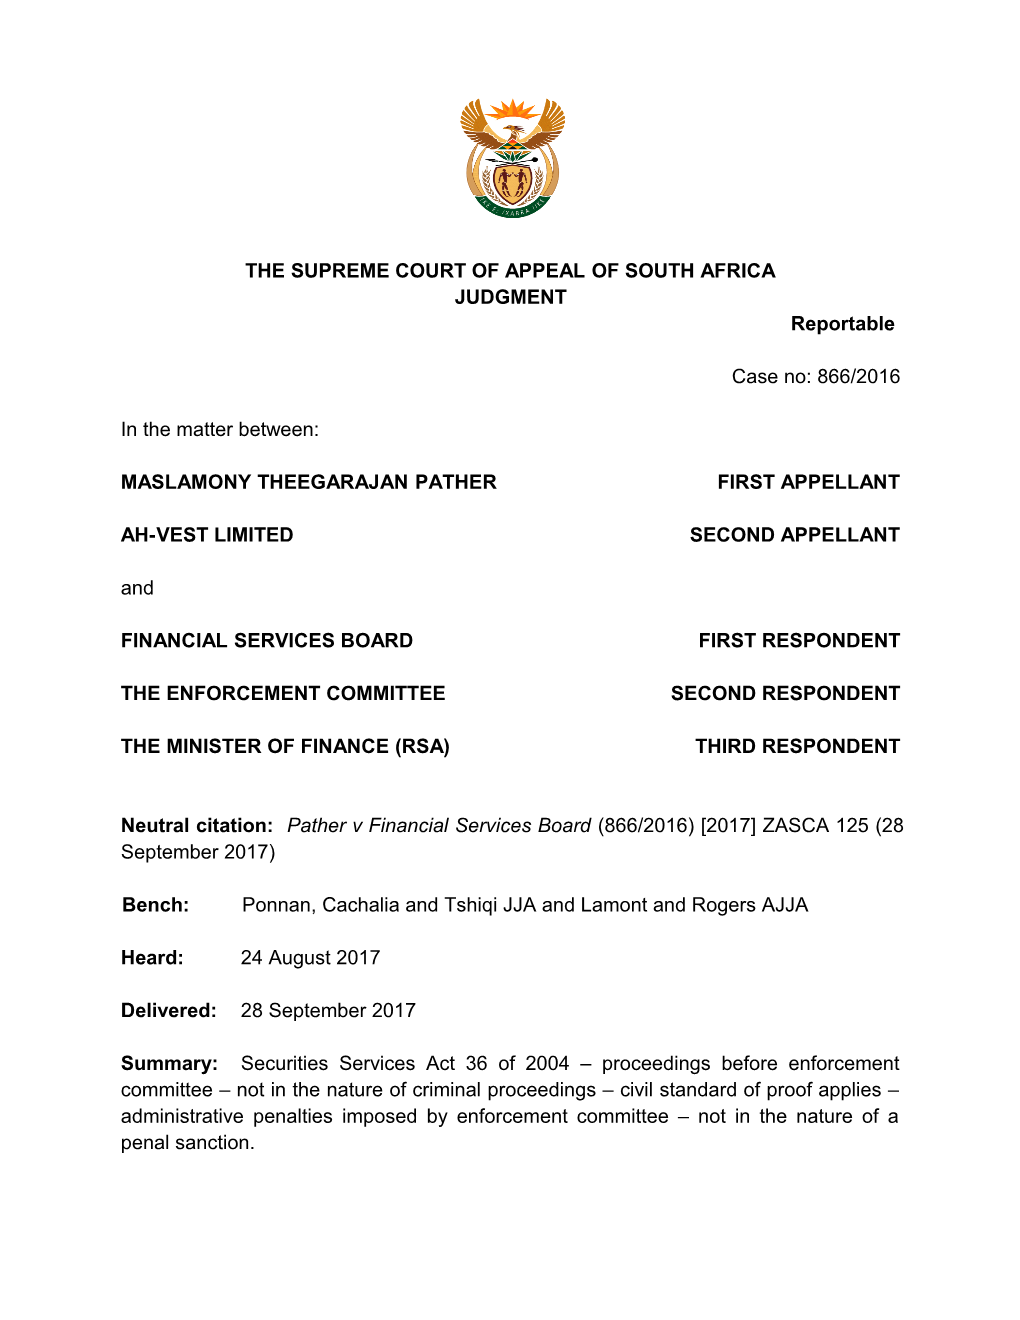 The Supreme Court of Appeal of South Africa s35